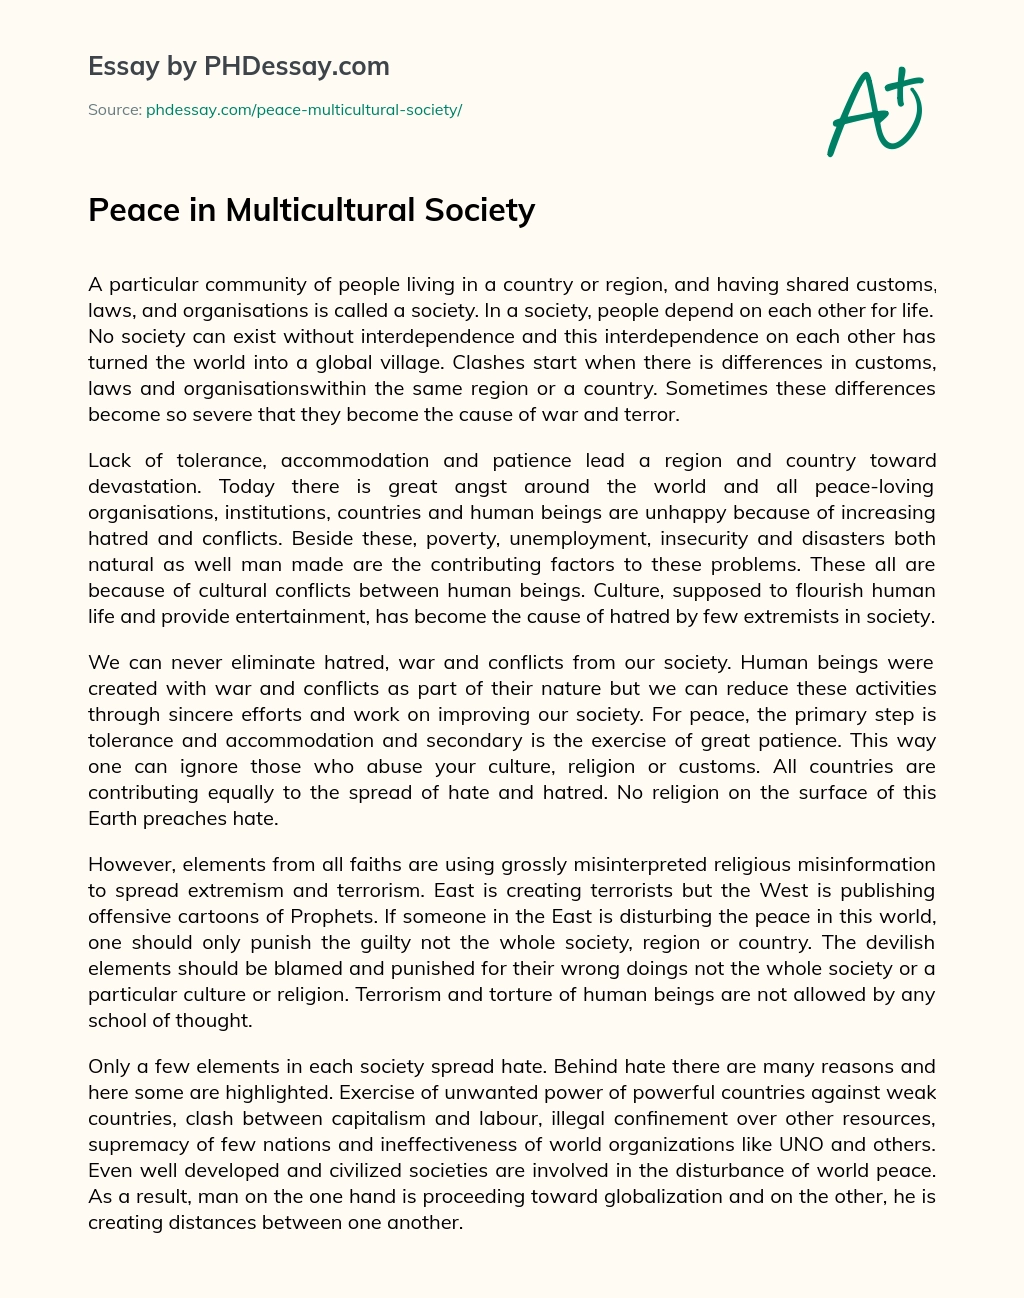 Peace in Multicultural Society essay